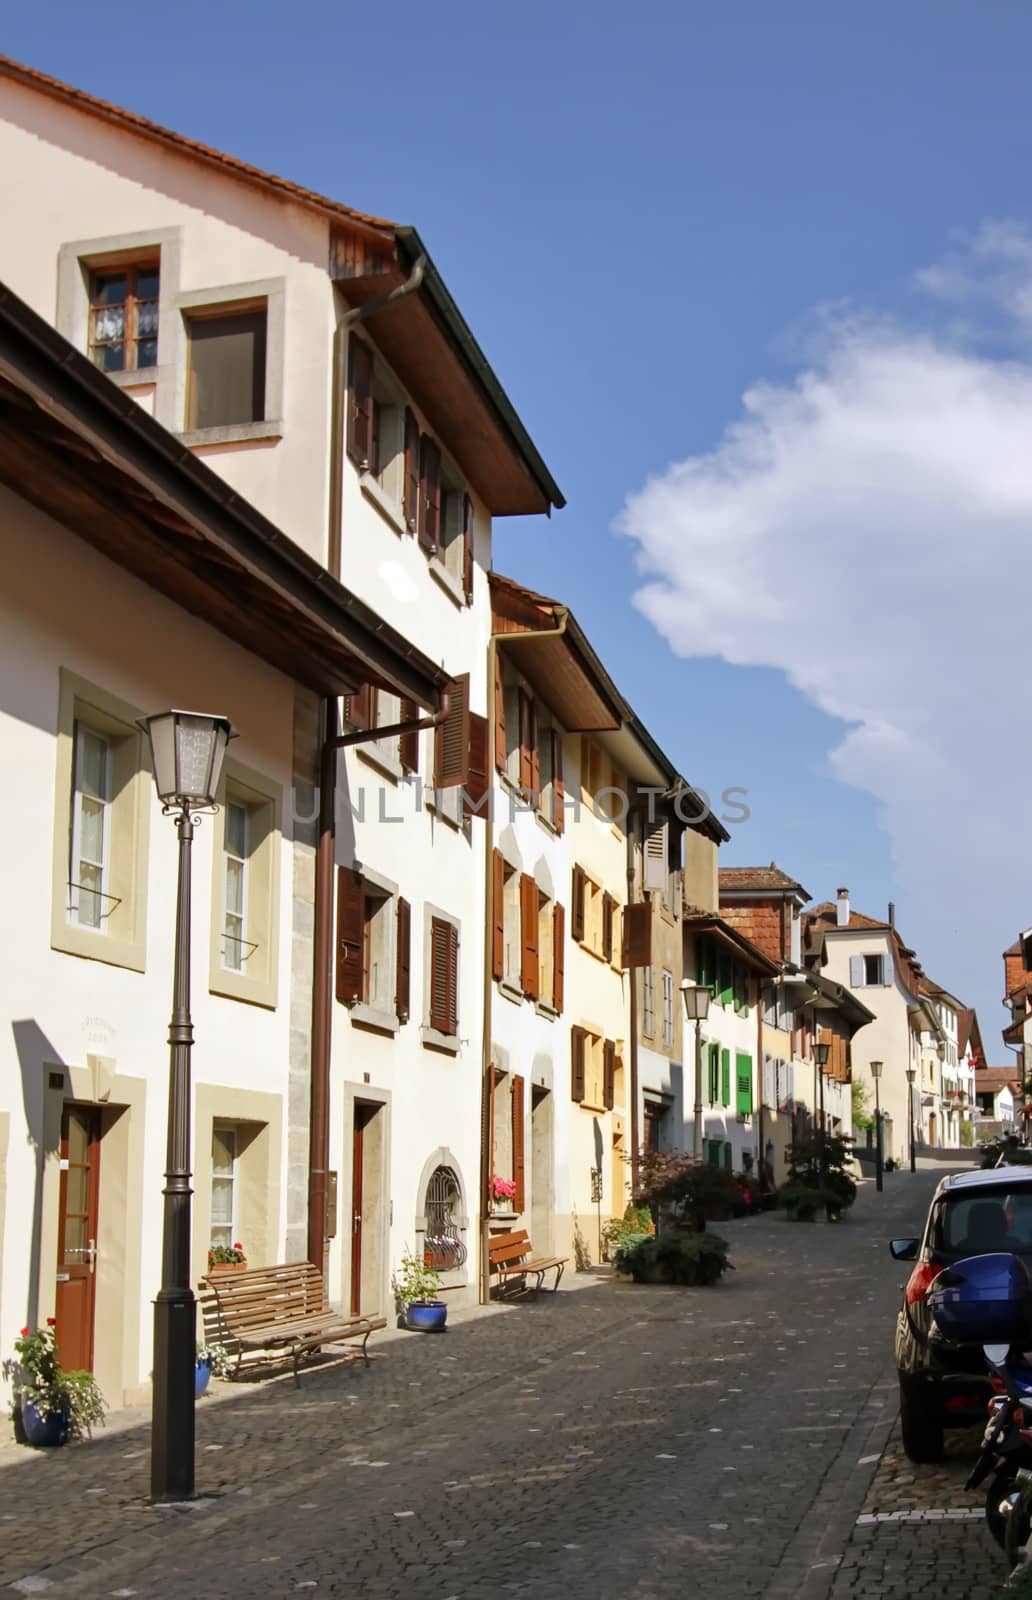 Narrow old street of Estavayer-le-lac, Fribourg canton, Switzerland